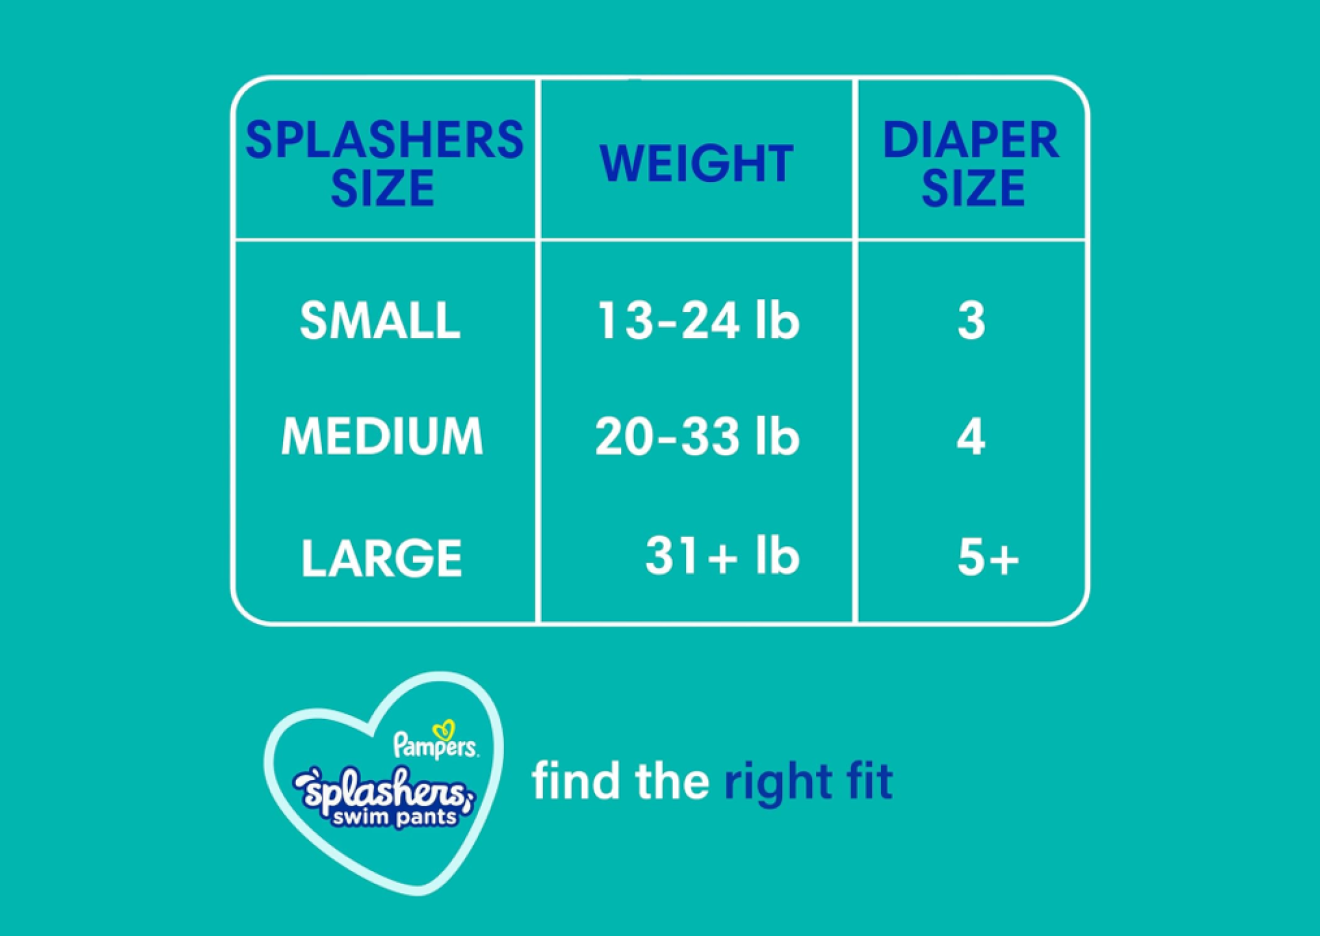 Pampers Splashers Disposable Swim Pants 20 Ct Size S 13-24 lb. One